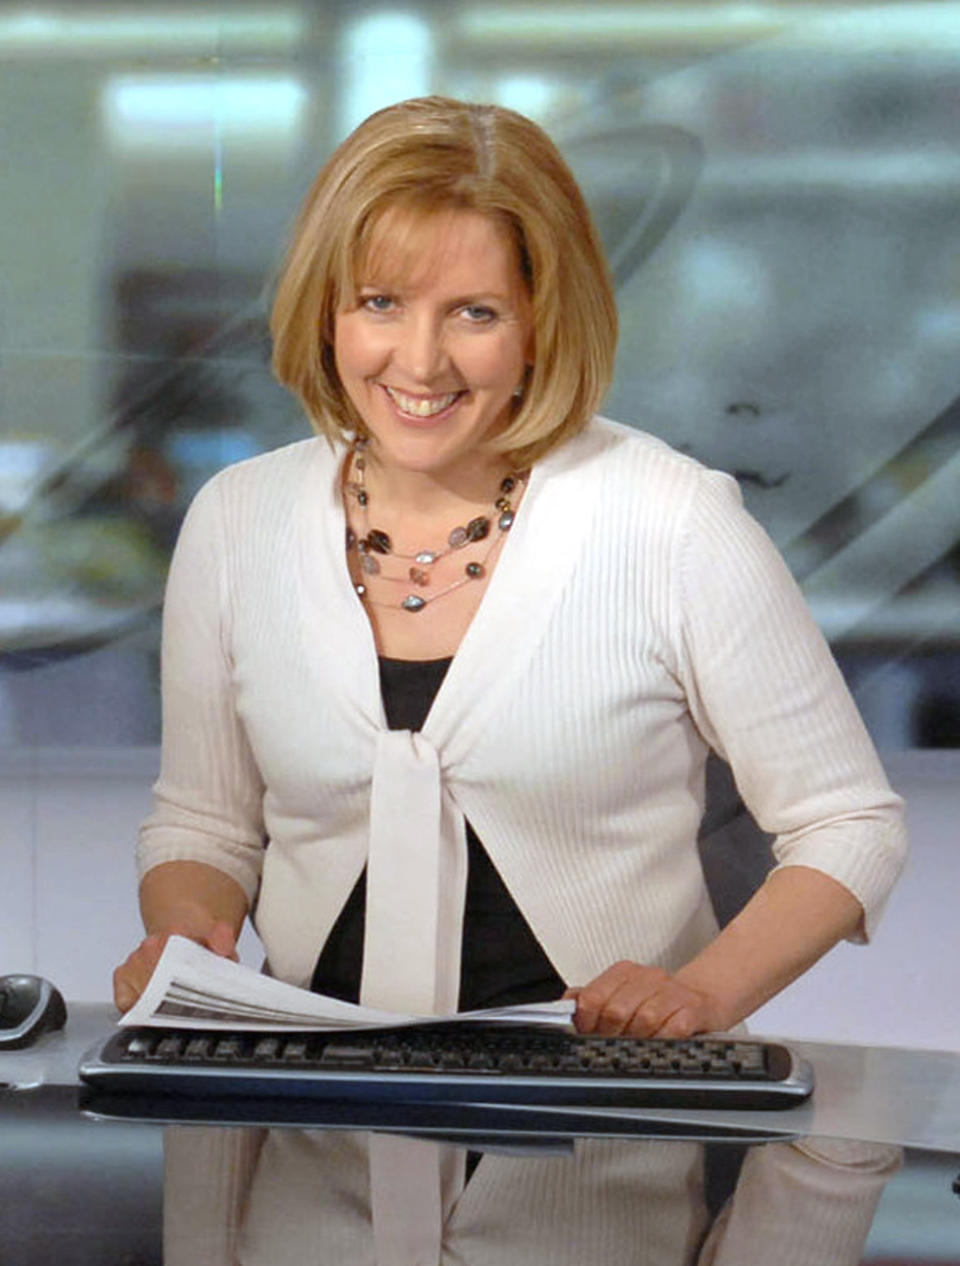 Gracie has been at the BBC for 30 years